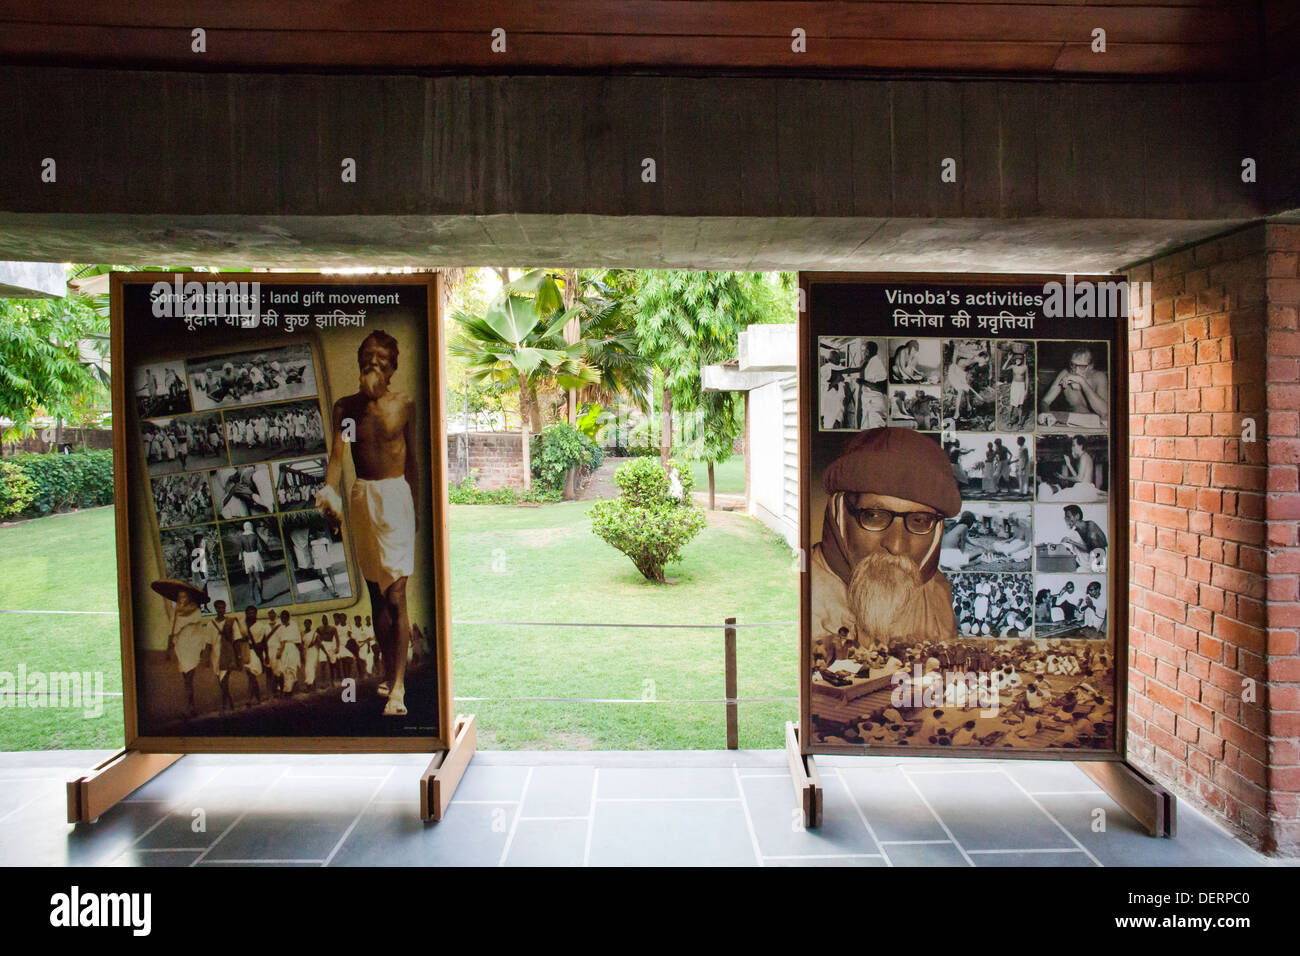 Pictures in a museum showing historic events at India's struggle for freedom, Sabarmati Ashram, Ahmedabad, Gujarat, India Stock Photo